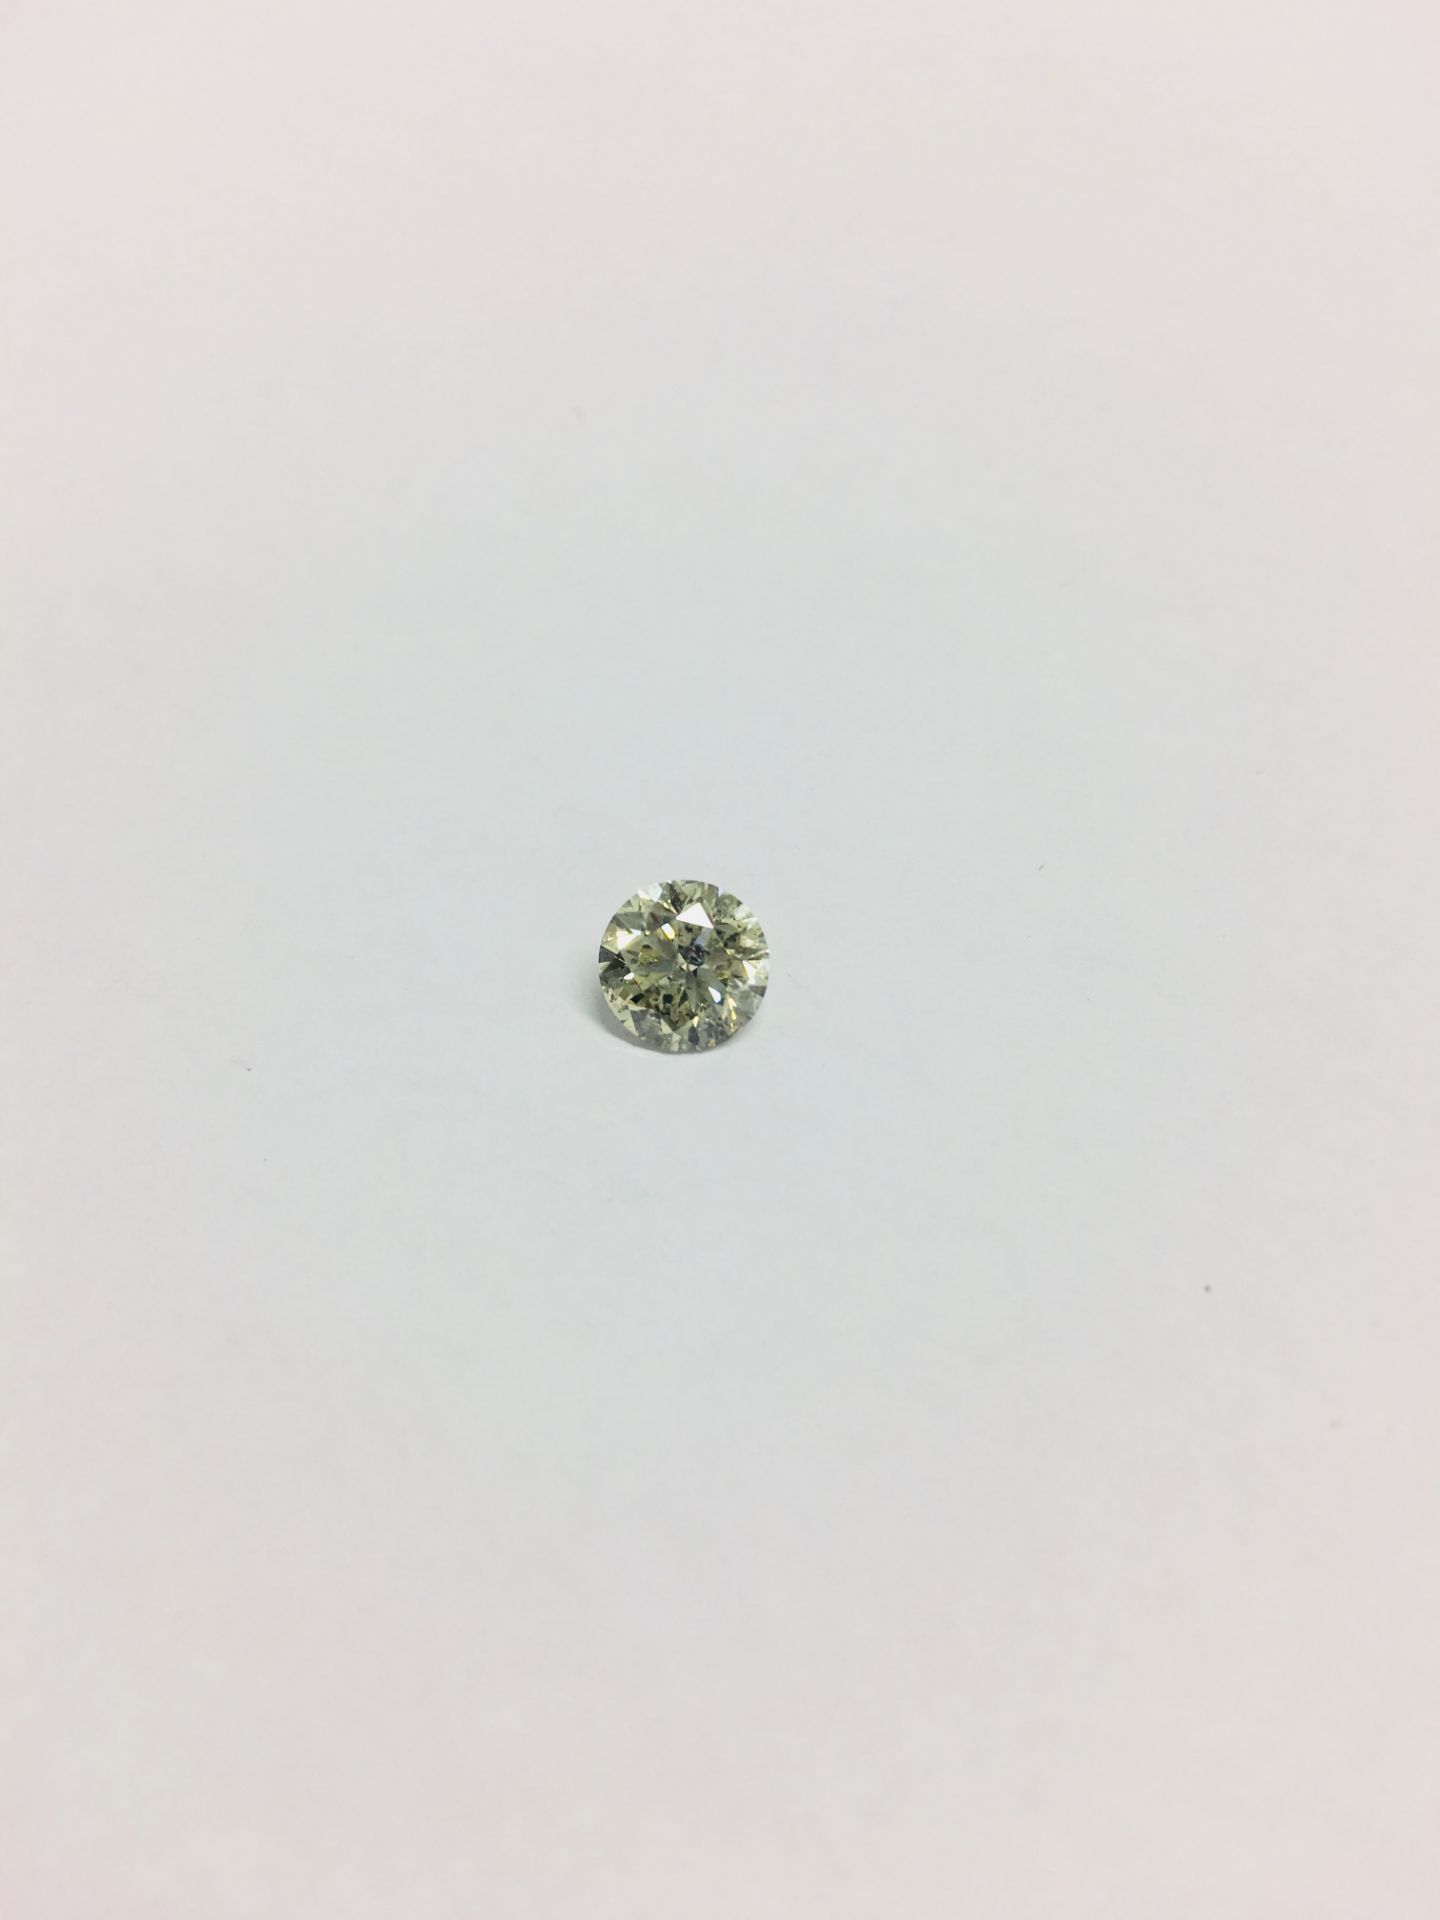 13ct Sapphire oval,16mmX14mm,natural sapphire ,treatment filled, - Image 5 of 5